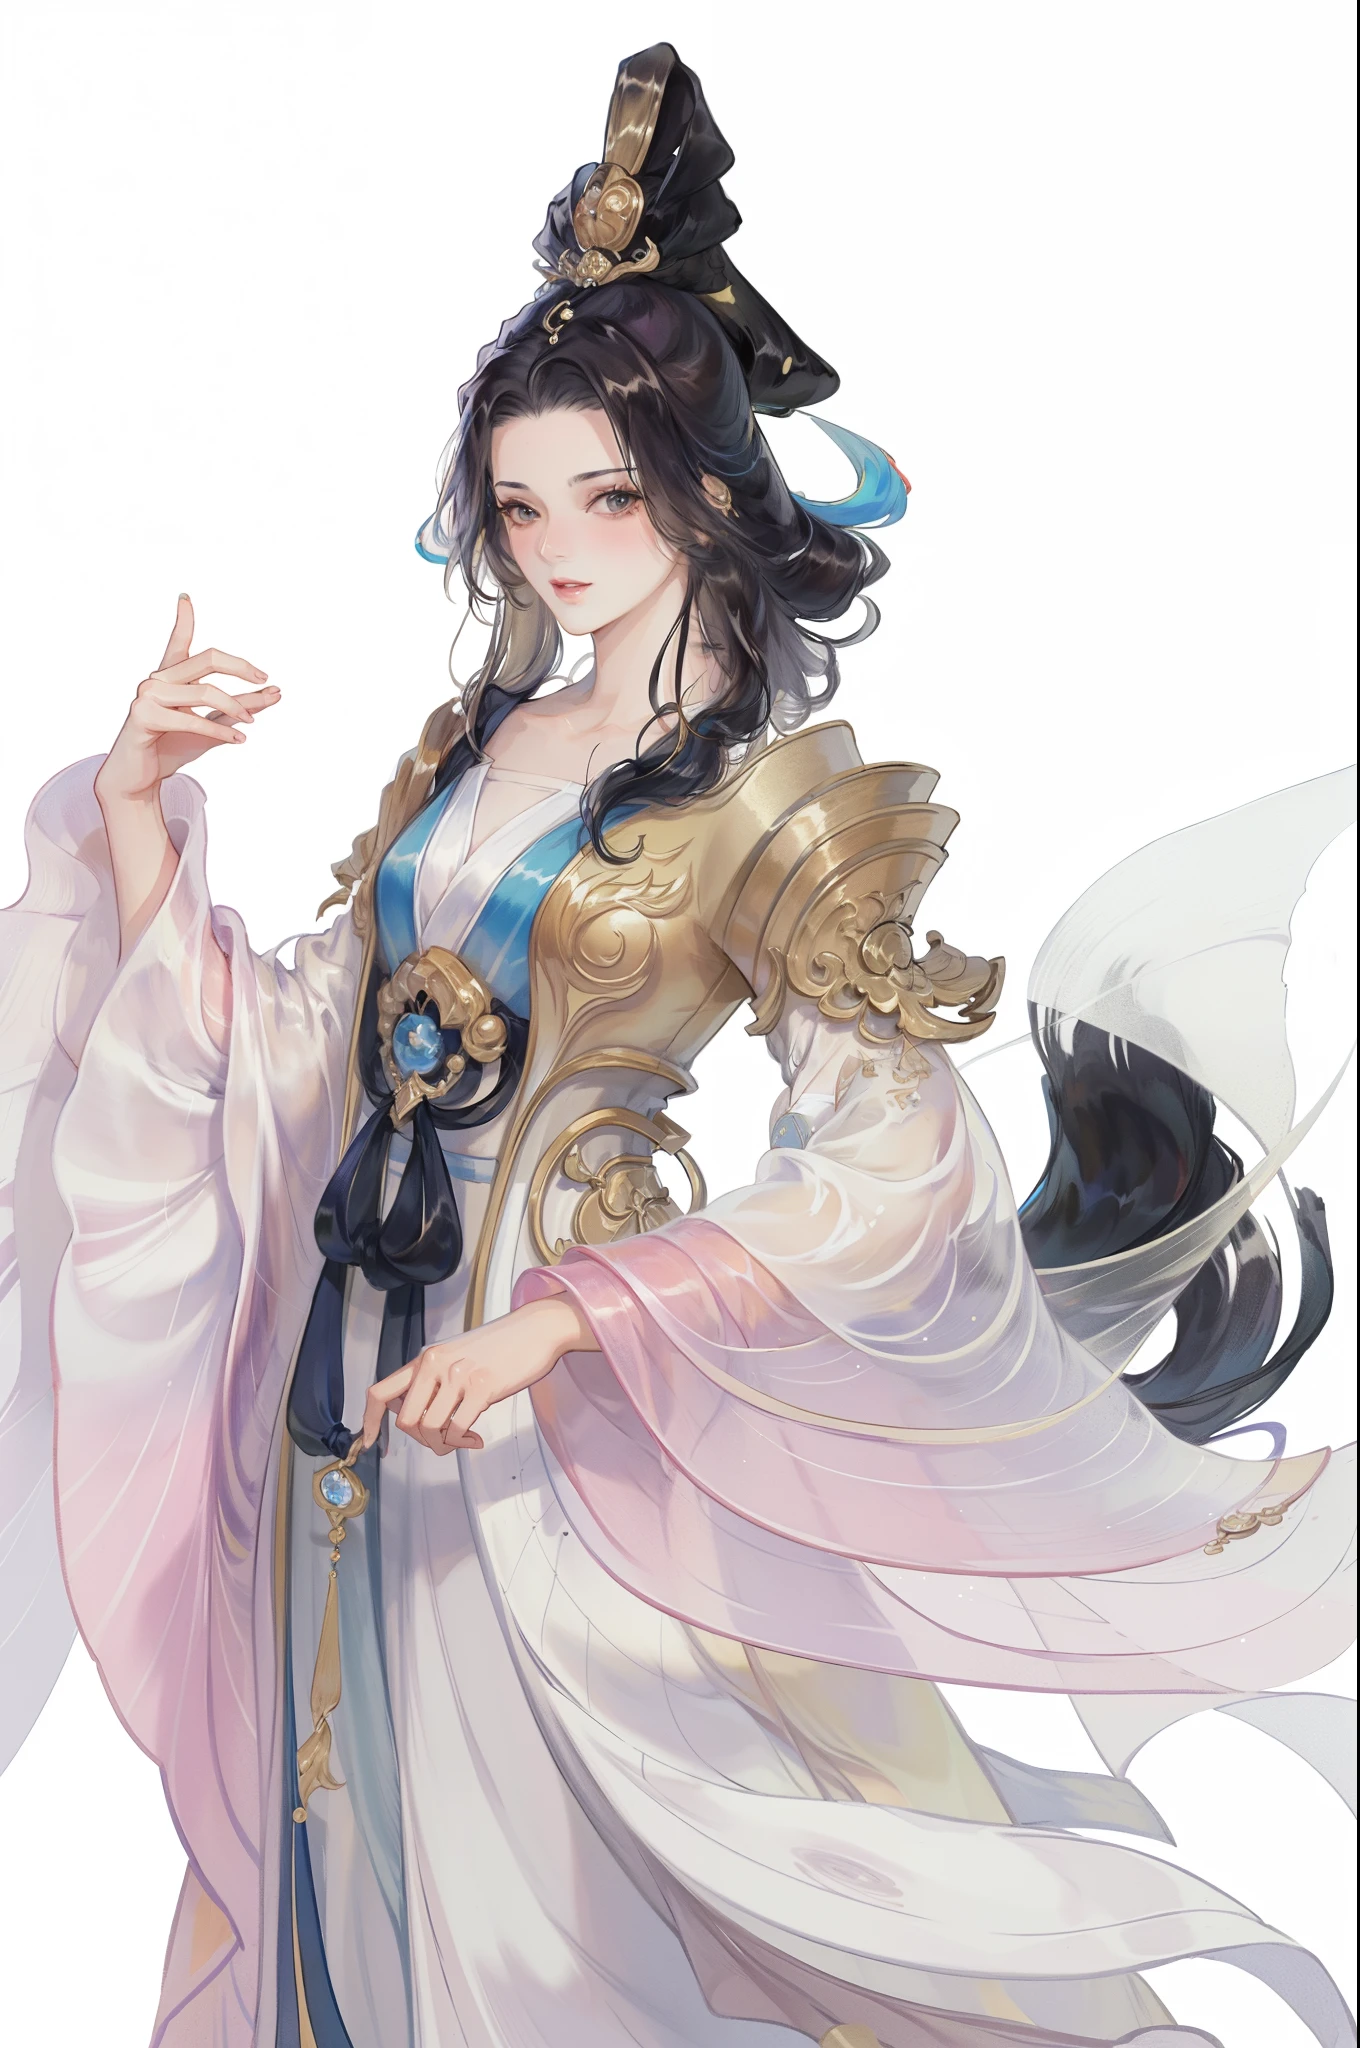 Best quality at best, Ultra-high resolution, (((1 girl))),(Long black hair), game fairy, Old palace, Hanfu, Yarn, Flowing light yarn, jewelry, (focal), (((Colorful))),(sketching:0.8) , tmasterpiece, Best quality at best, beautiful painted, meticulous,(Denoising:0.6), highly  detailed, (tmasterpiece, Best quality at best） CG unified 8K wallpaper，tmasterpiece，Best quality，ultra - detailed）, Super HD picture quality，Clear face